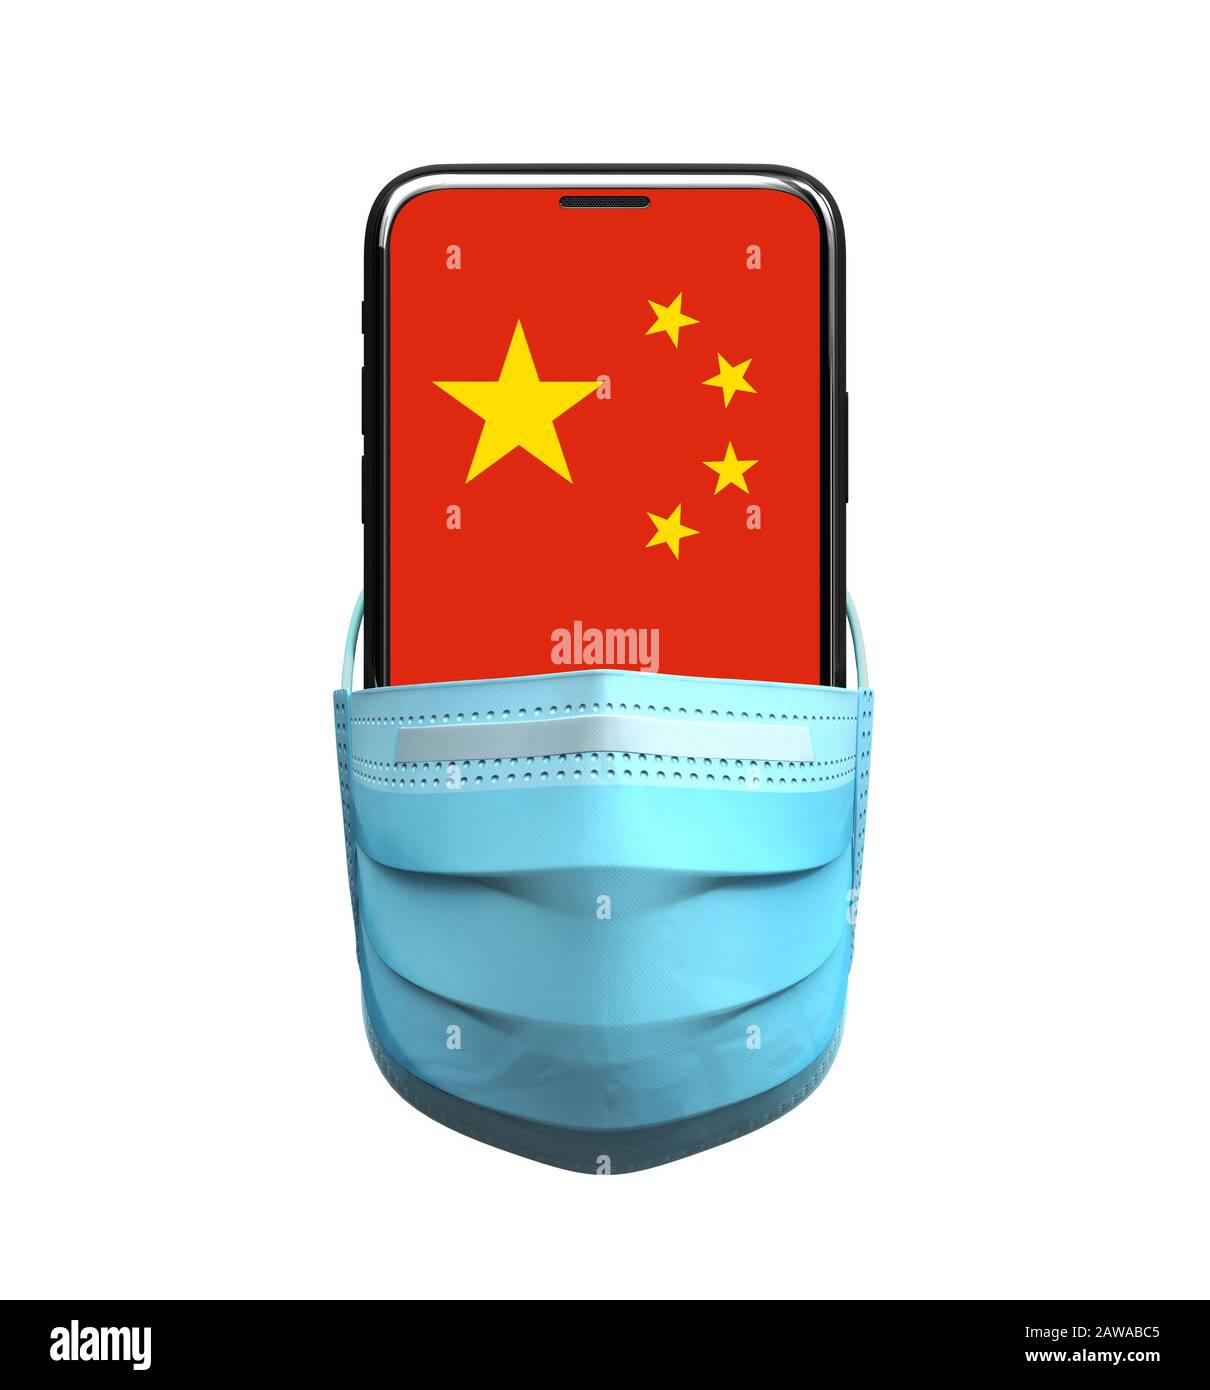 Smartphone In Medical Mask With Chinese Flag On The Screen Stock Photo